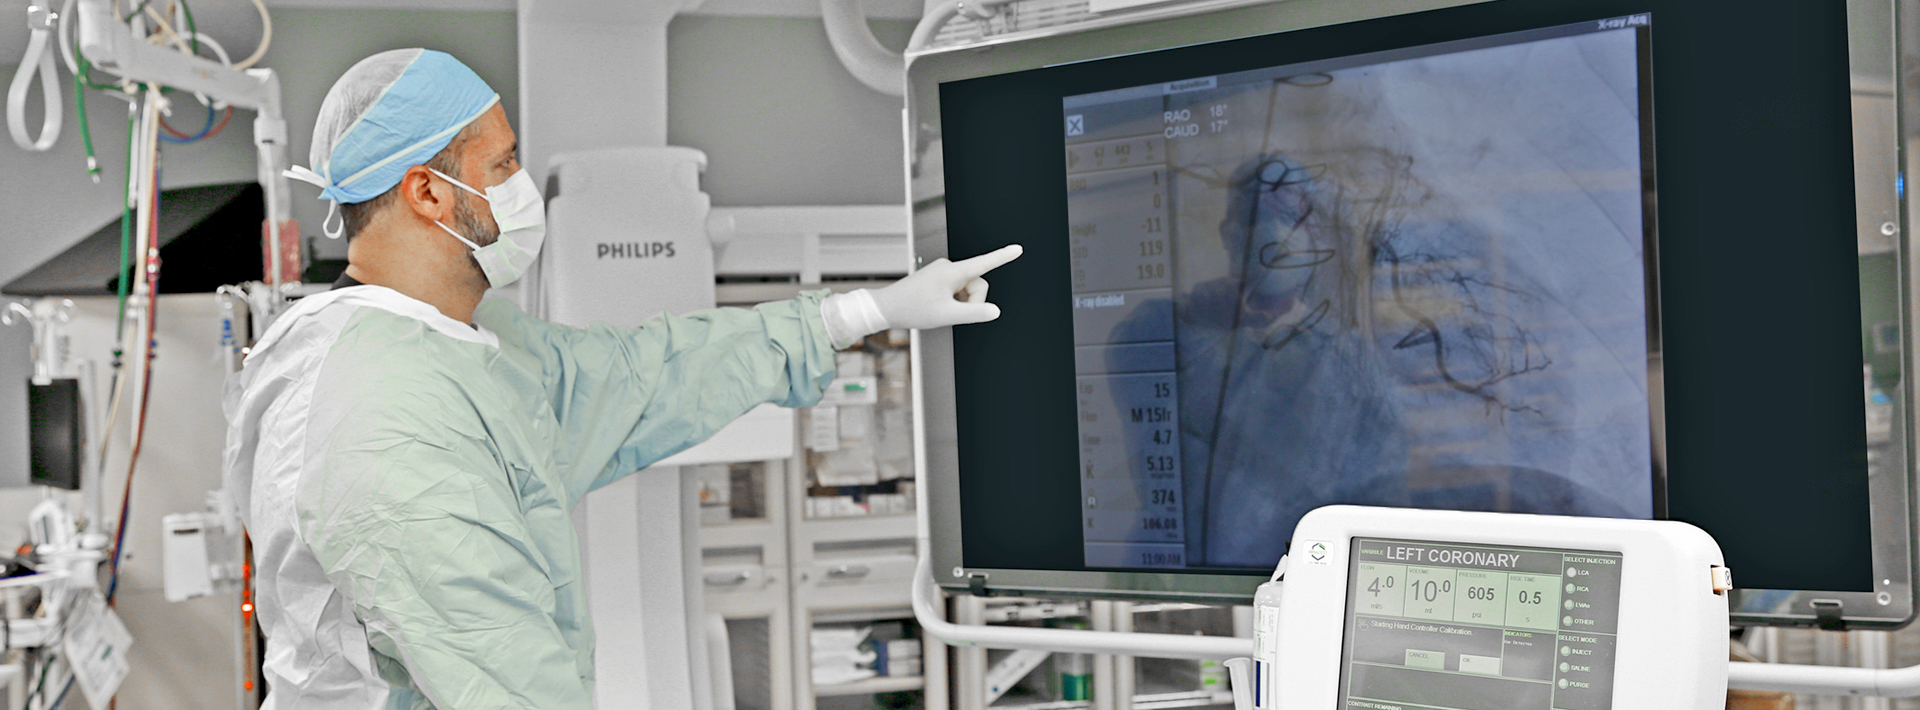 Doctor pointing to screen in operating room